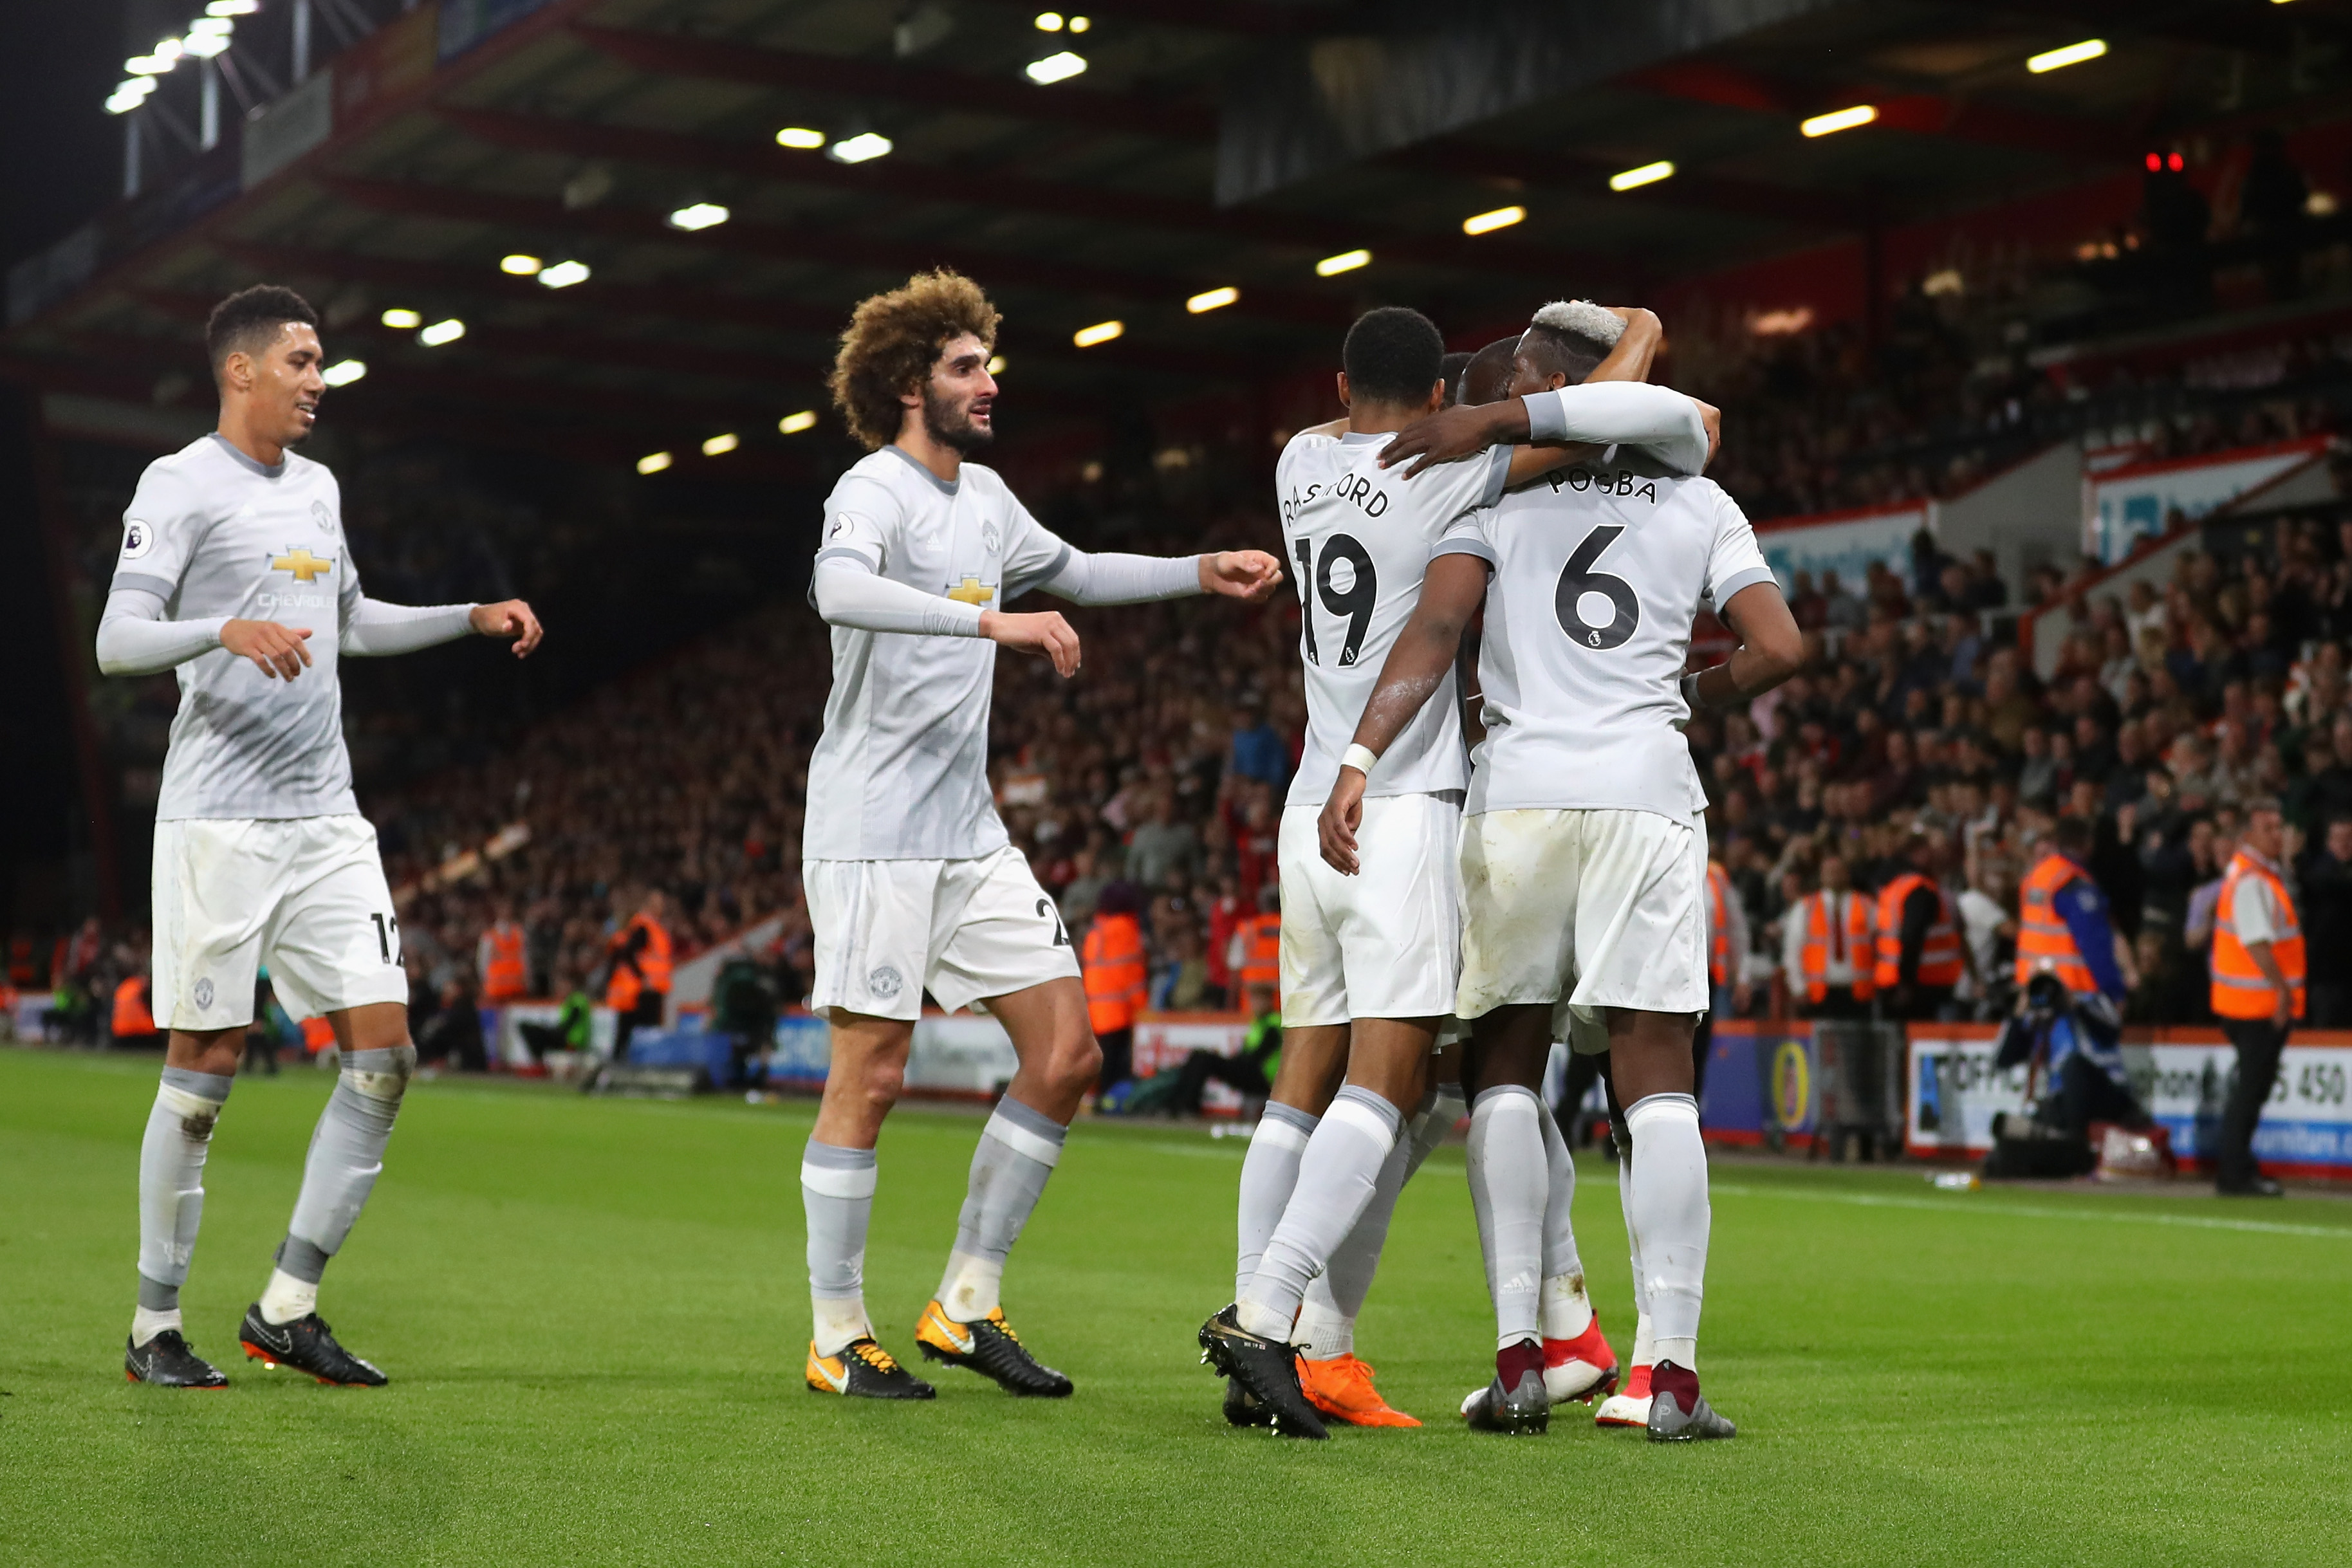 BOURNEMOUTH, ENGLAND - APRIL 18:  Romelu Lukaku of Manchester United celebrates with teammates after scoring his sides second goal during the Premier League match between AFC Bournemouth and Manchester United at Vitality Stadium on April 18, 2018 in Bournemouth, England.  (Photo by Catherine Ivill/Getty Images)